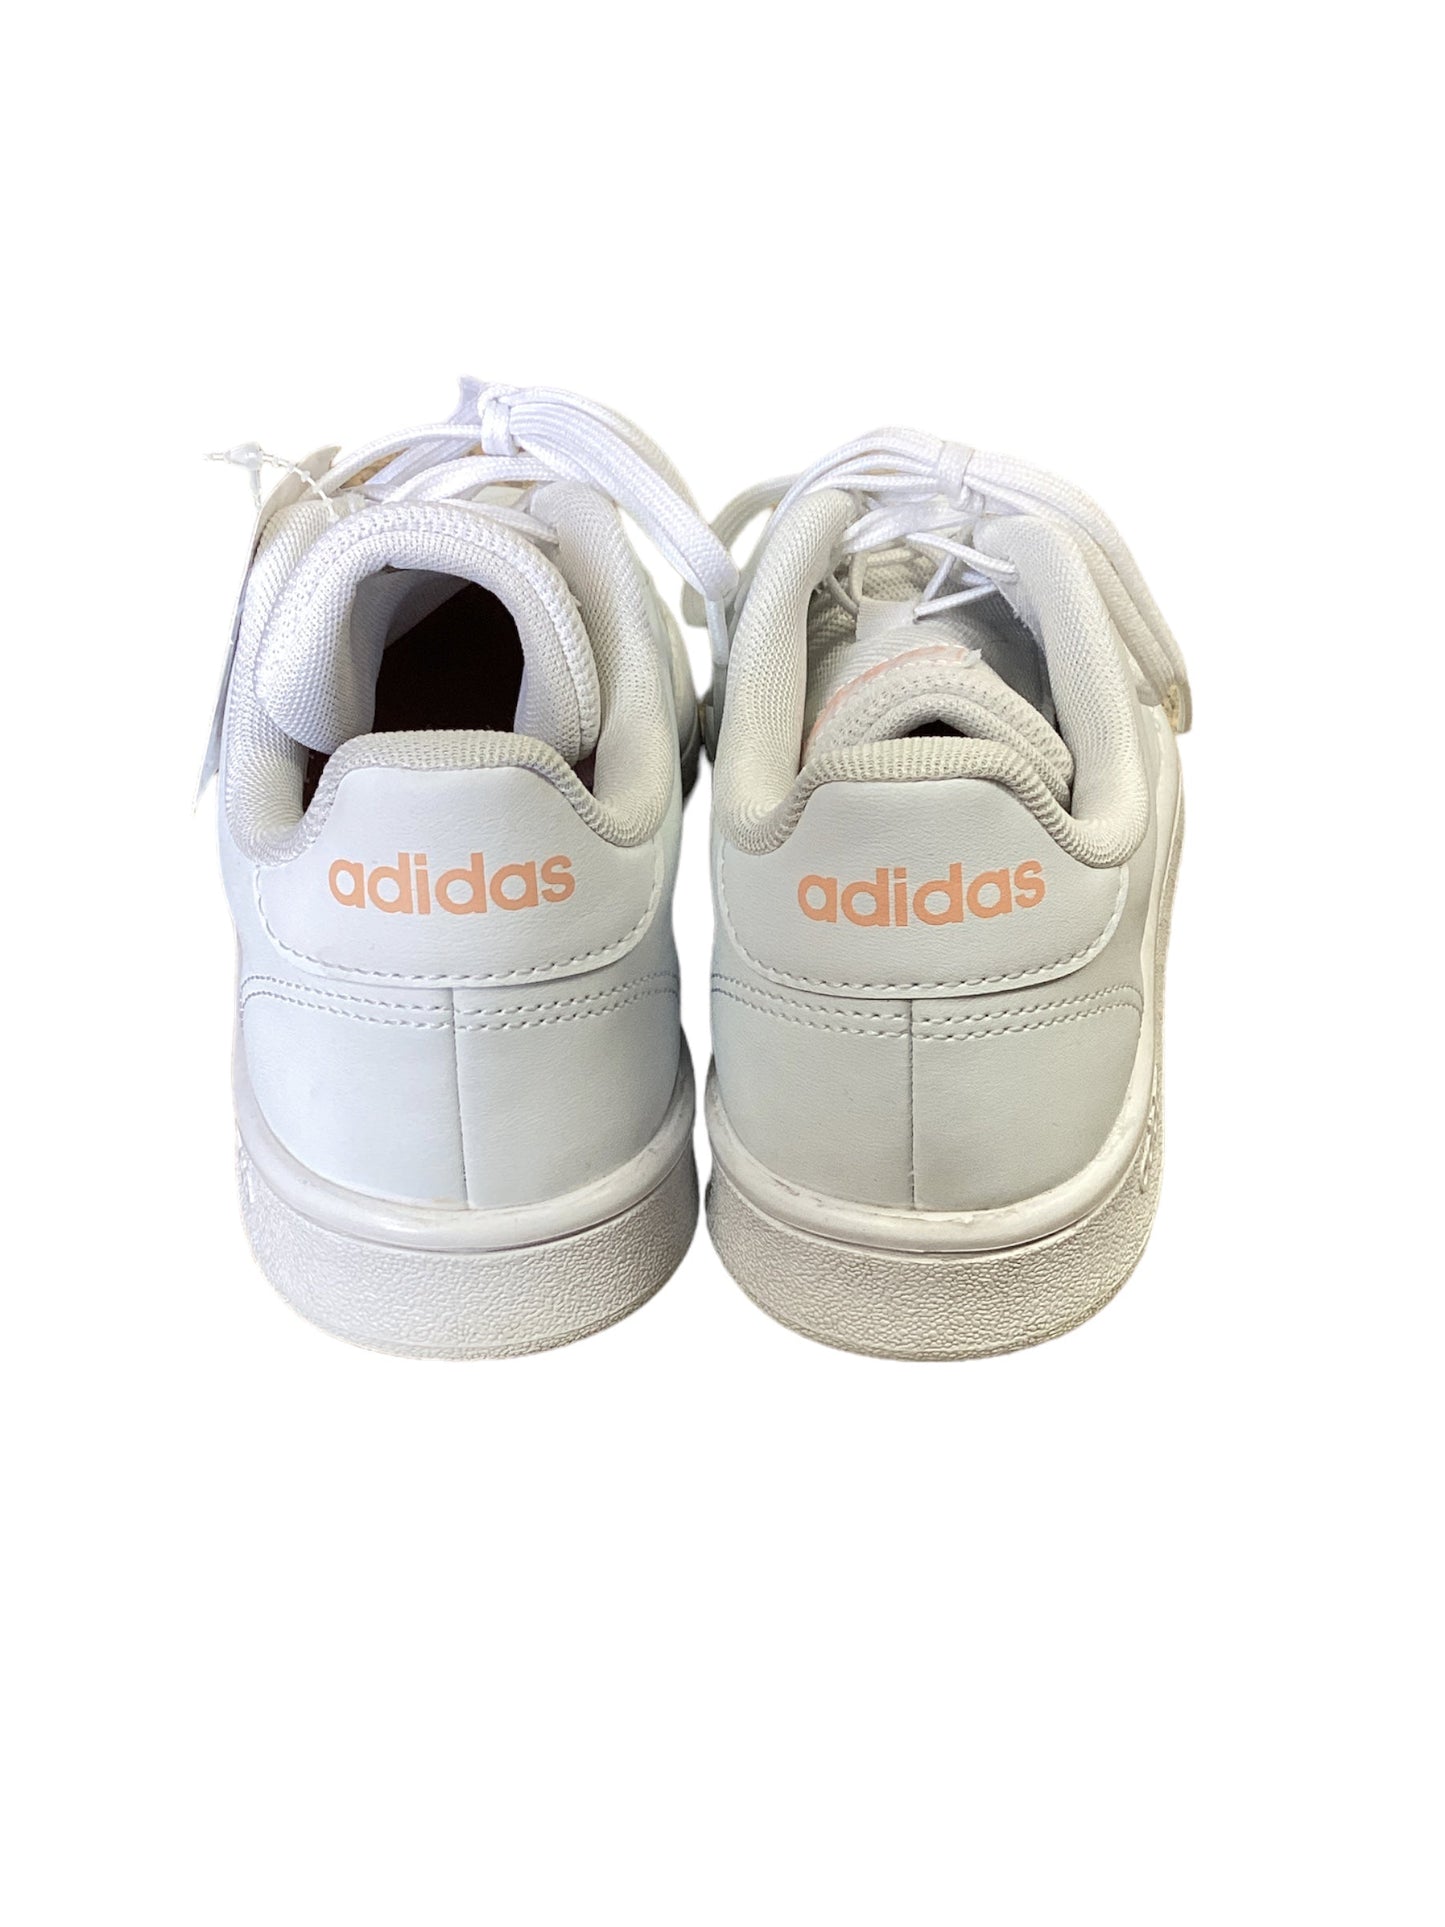 Shoes Sneakers By Adidas  Size: 6.5